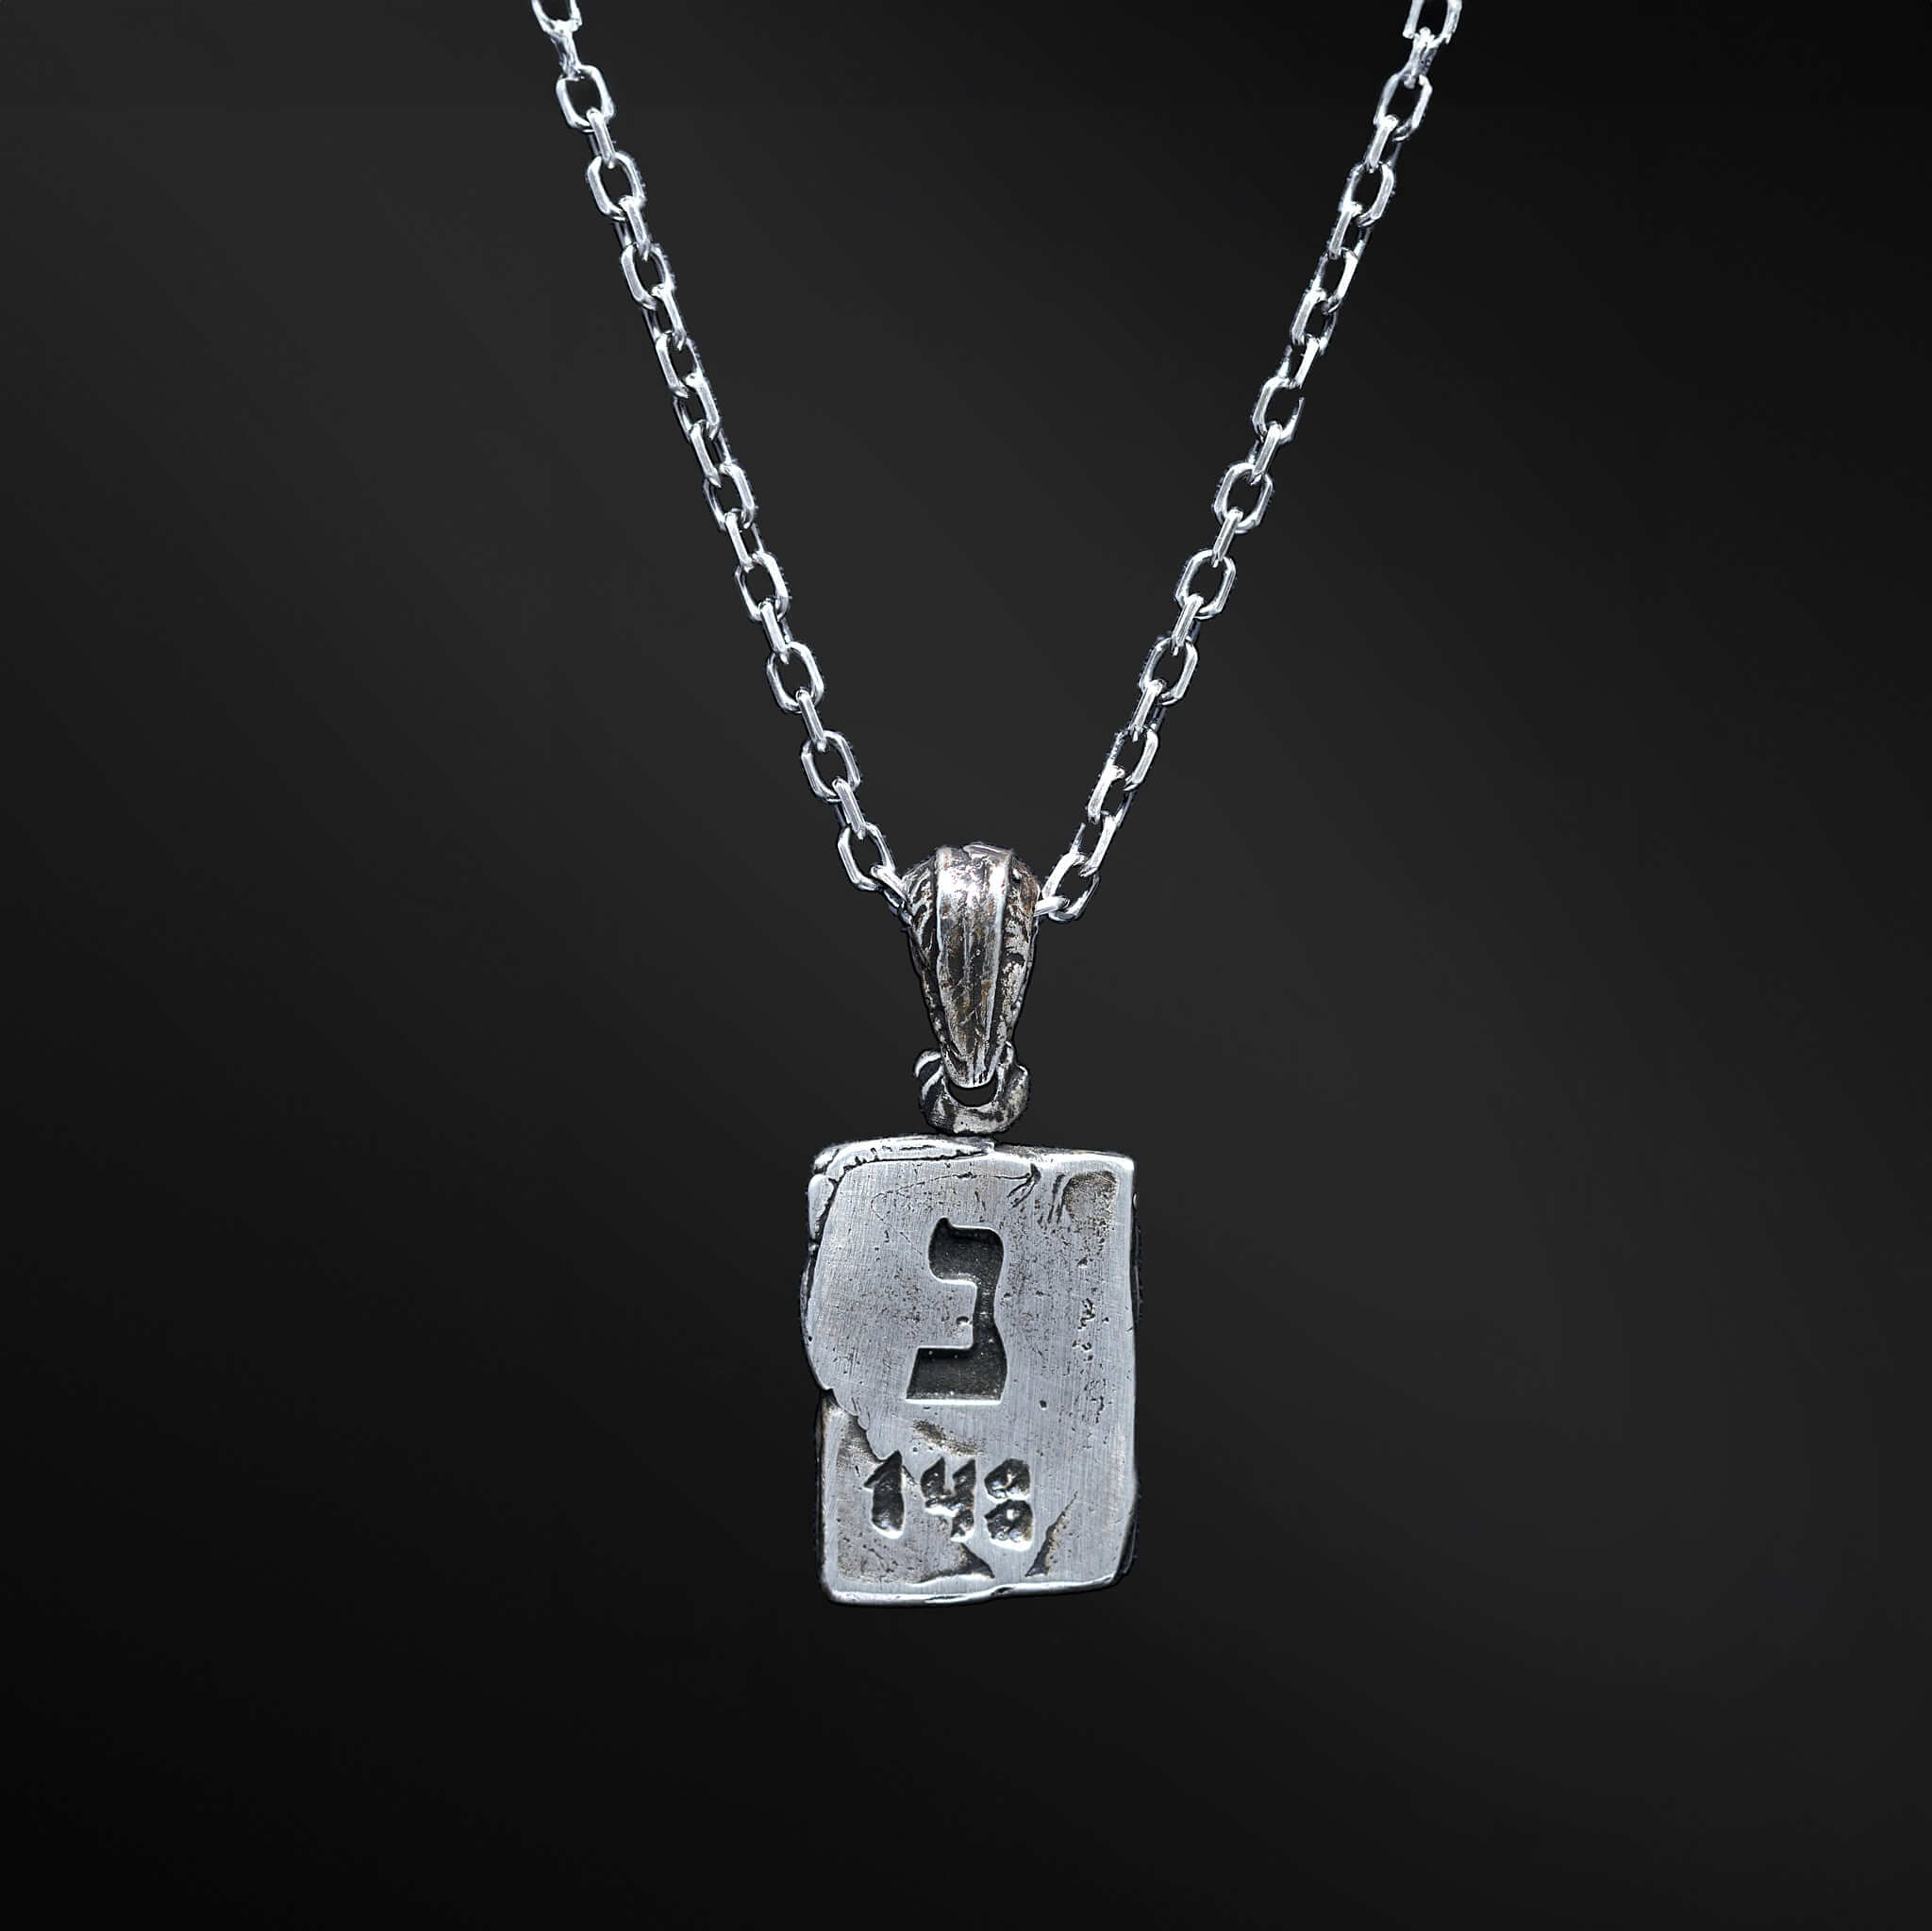 Unlock the hidden meaning of our Noun necklace. Crafted with a rectangular silver plate showcasing the Hebrew letter &quot;נ&quot; and the number 148, this pendant holds a special significance and becomes a beautiful expression of spirituality. Choose this piece to elevate your personal style with a touch of depth and profound meaning.